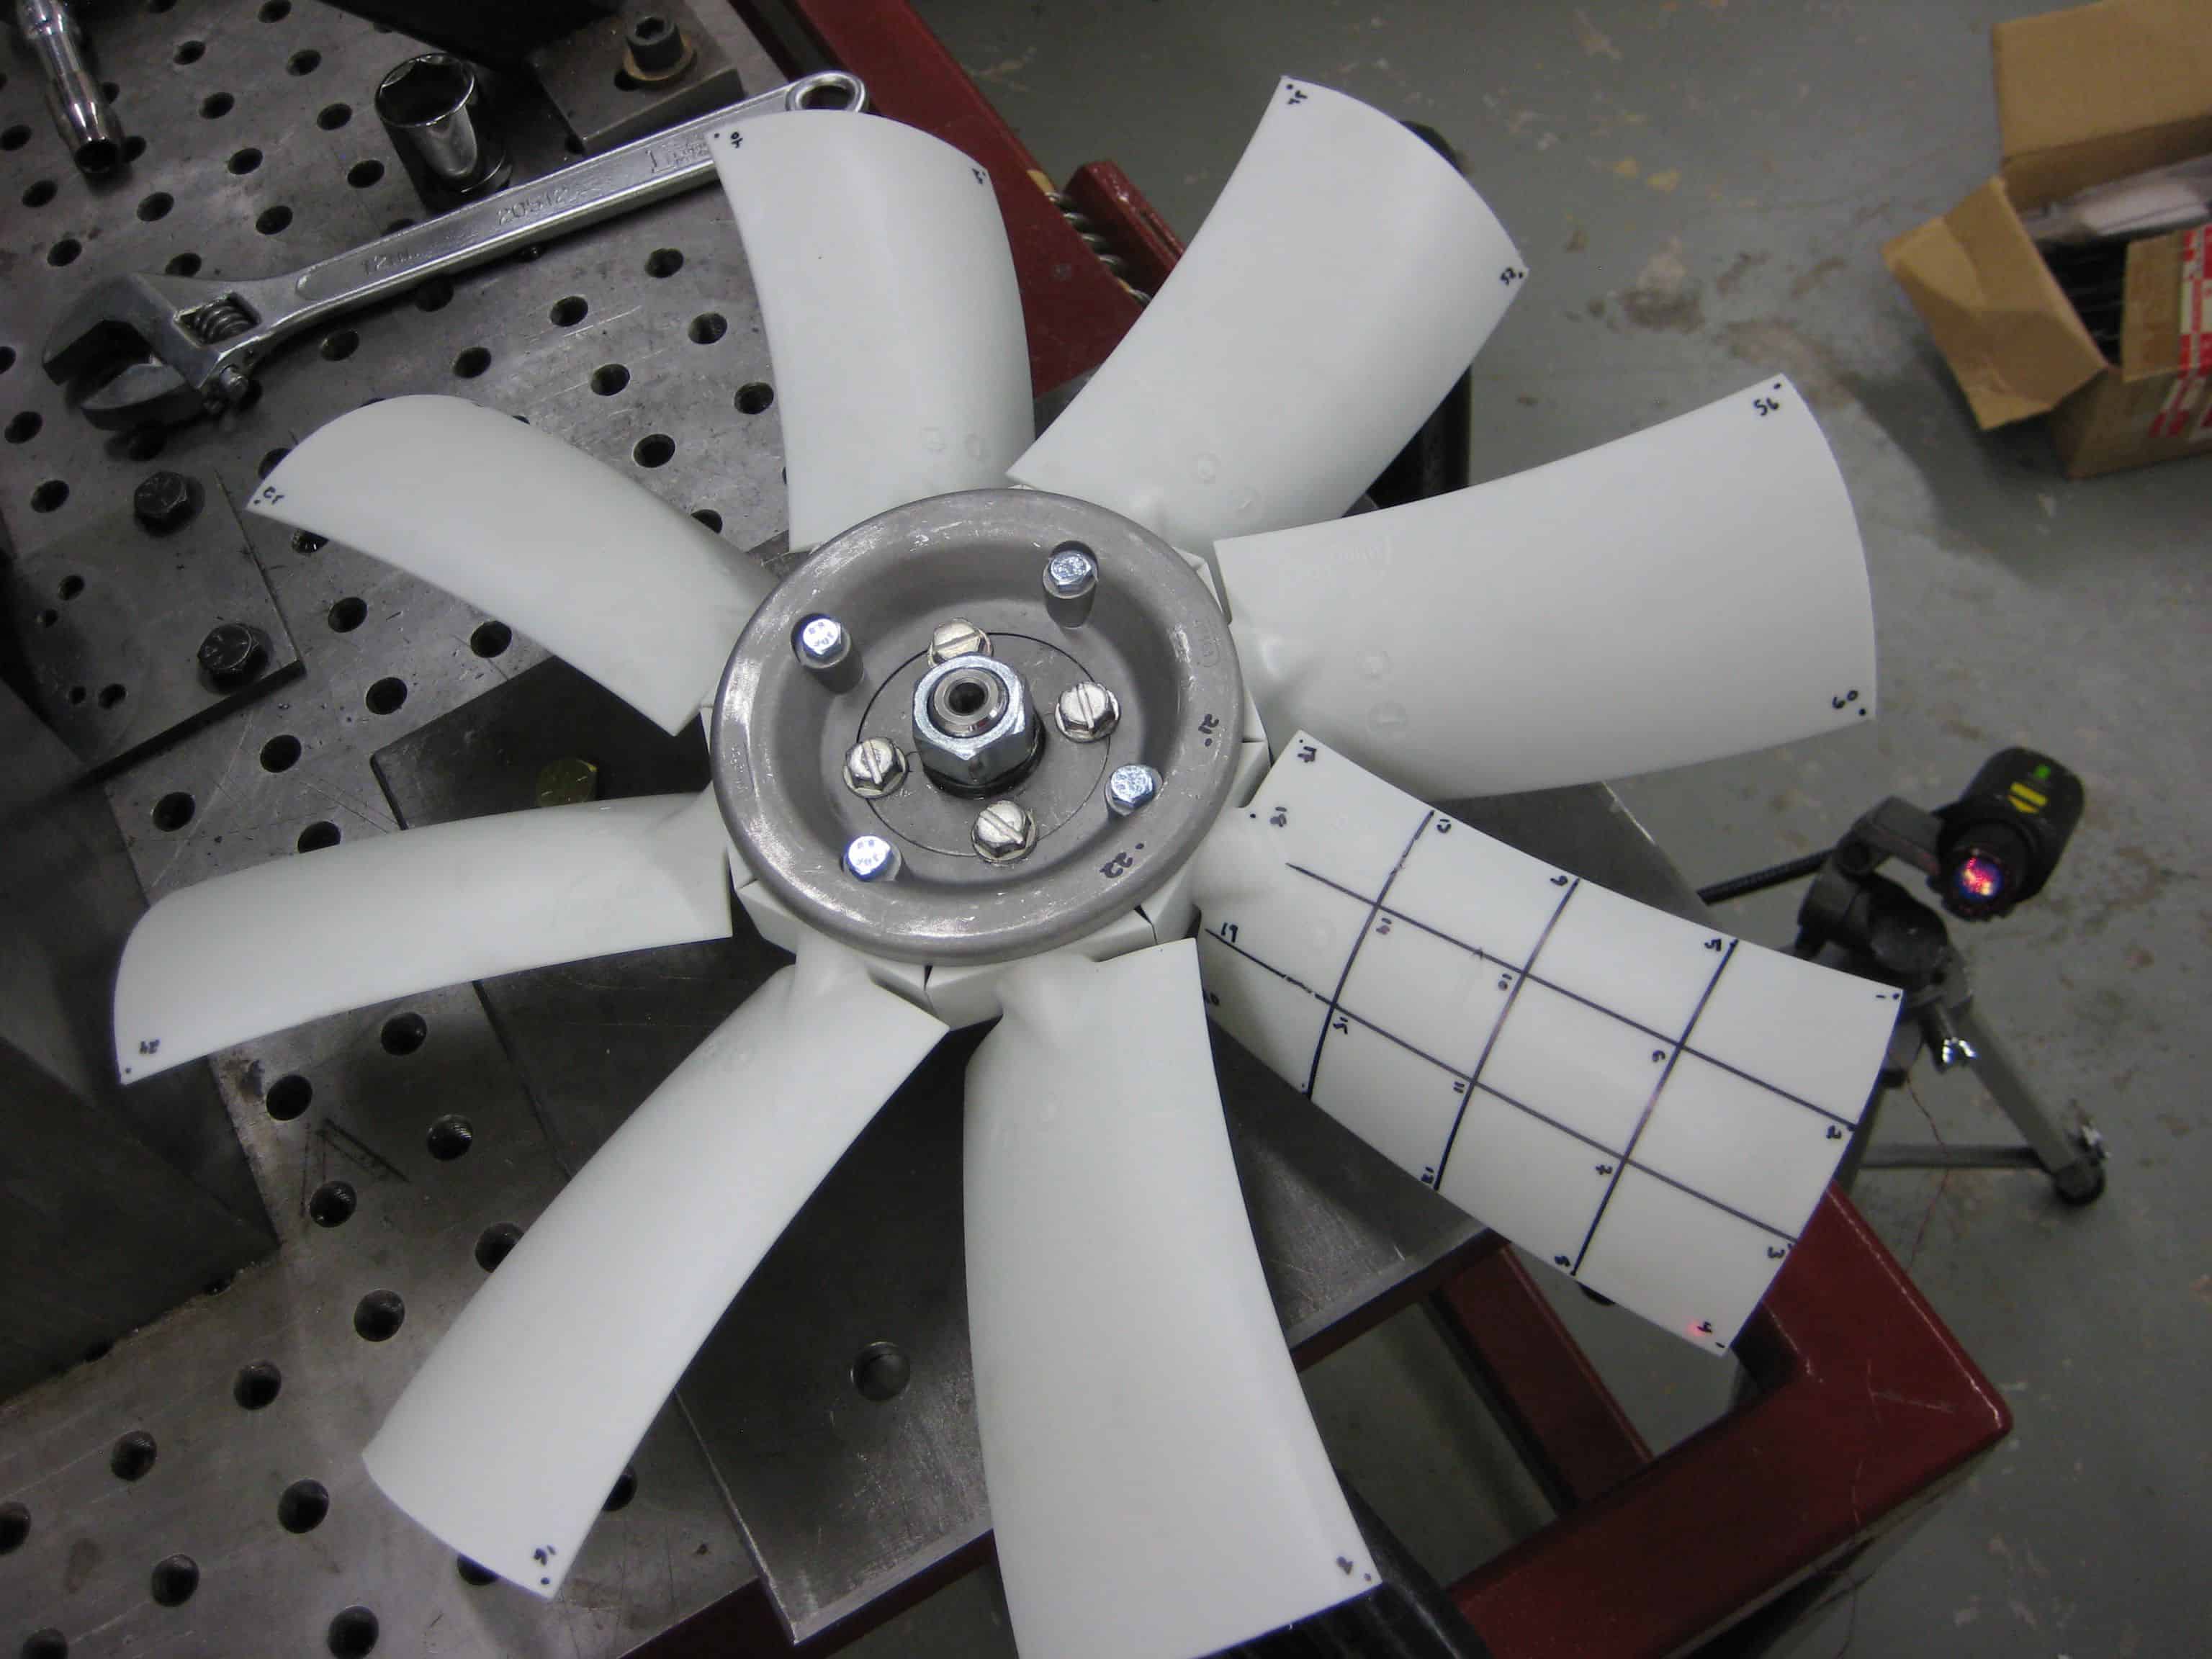 Modal-Vibration-Testing-and-Frequency-Analysis-Ansys-Consulting-SimuTech-Group-Radiator-Fan